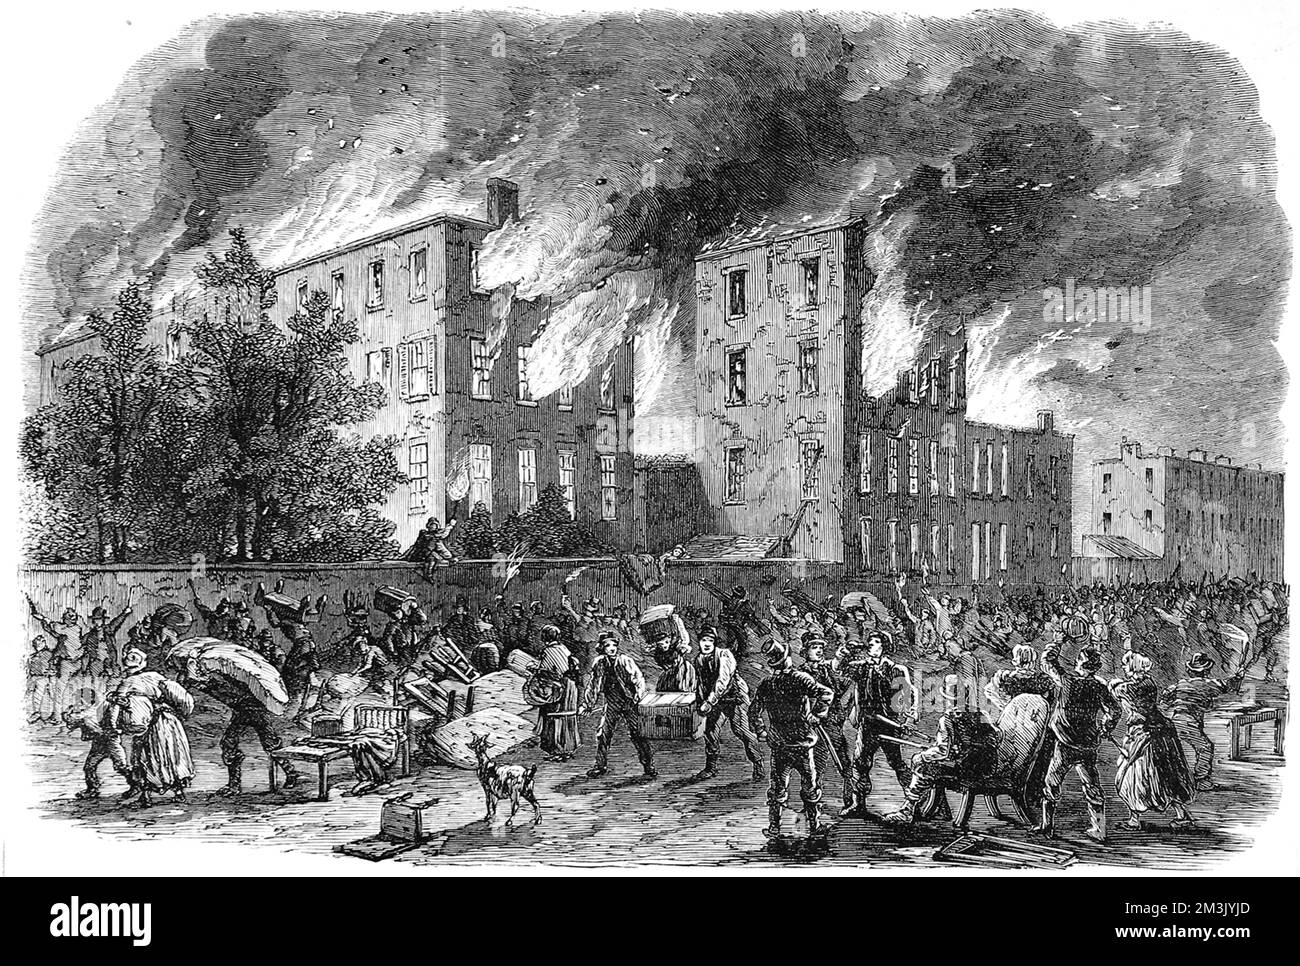 Destruction of the coloured orphan asylum. Anti-draft riots in New York caused at least 120 deaths and $2 million worth of damage. Returning soldiers from the Battle of Gettysburg put down the disturbances.  1863 Stock Photo